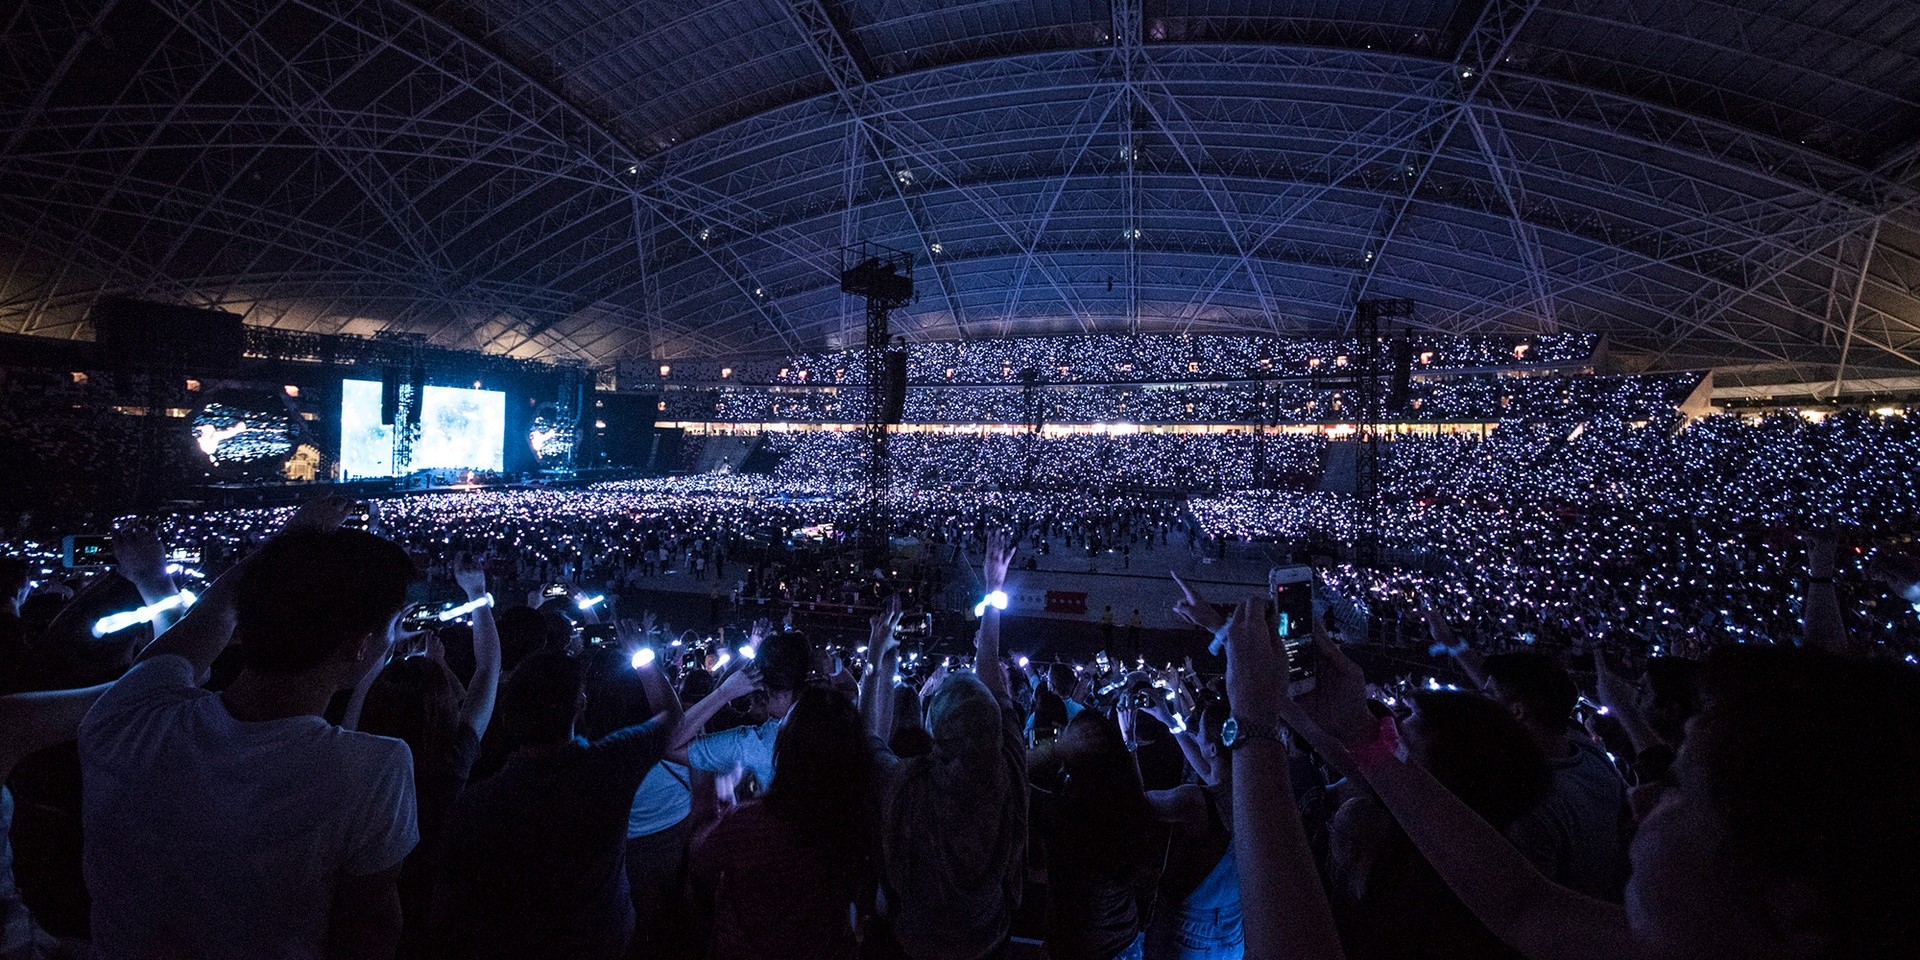 7 of the biggest concerts held in Singapore